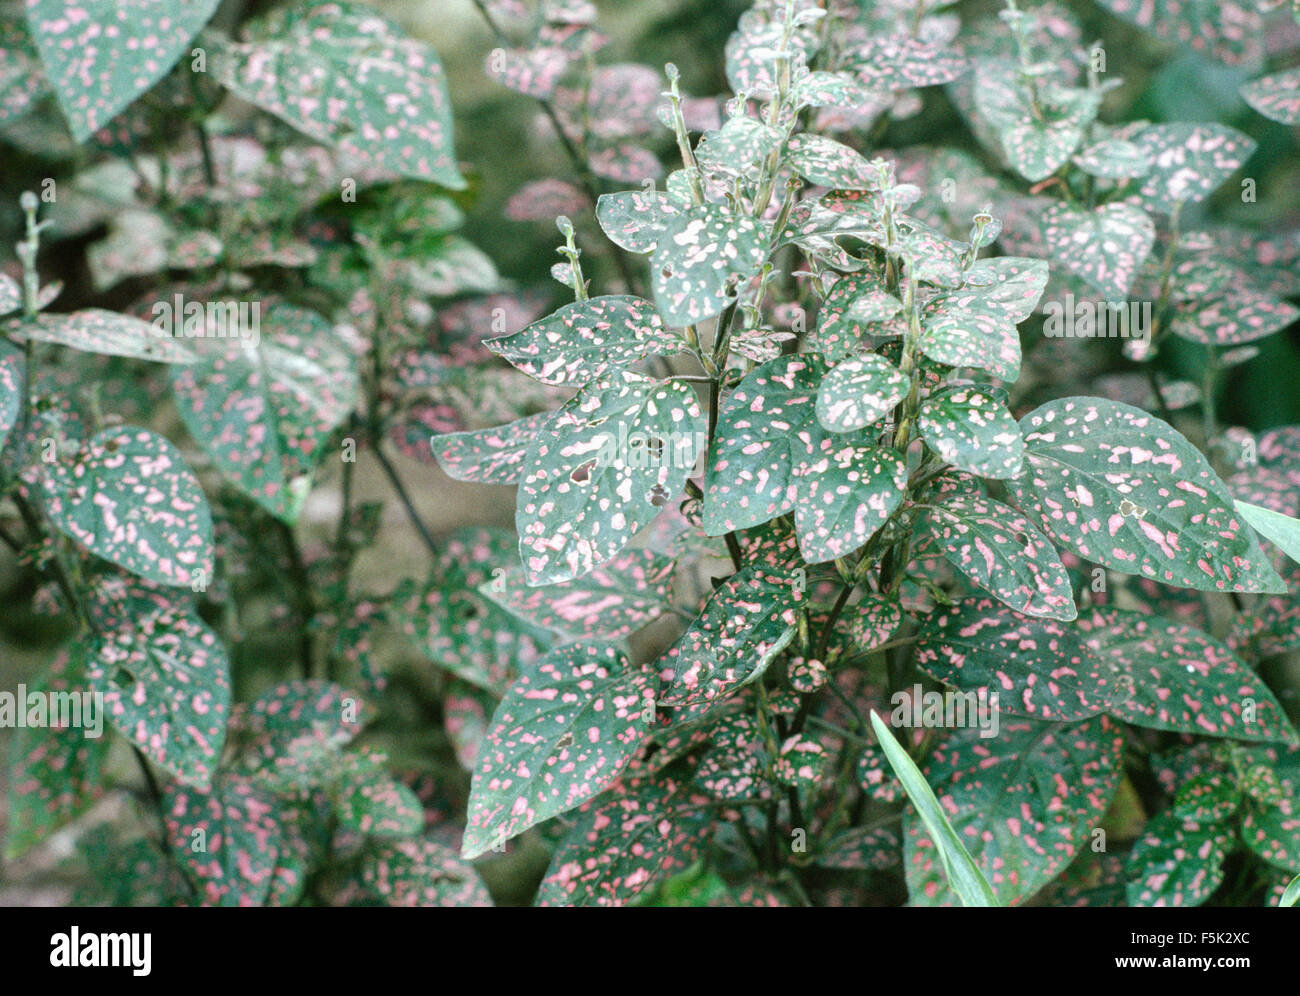 Close-up of a Hypoestes phyllostachya Stock Photo